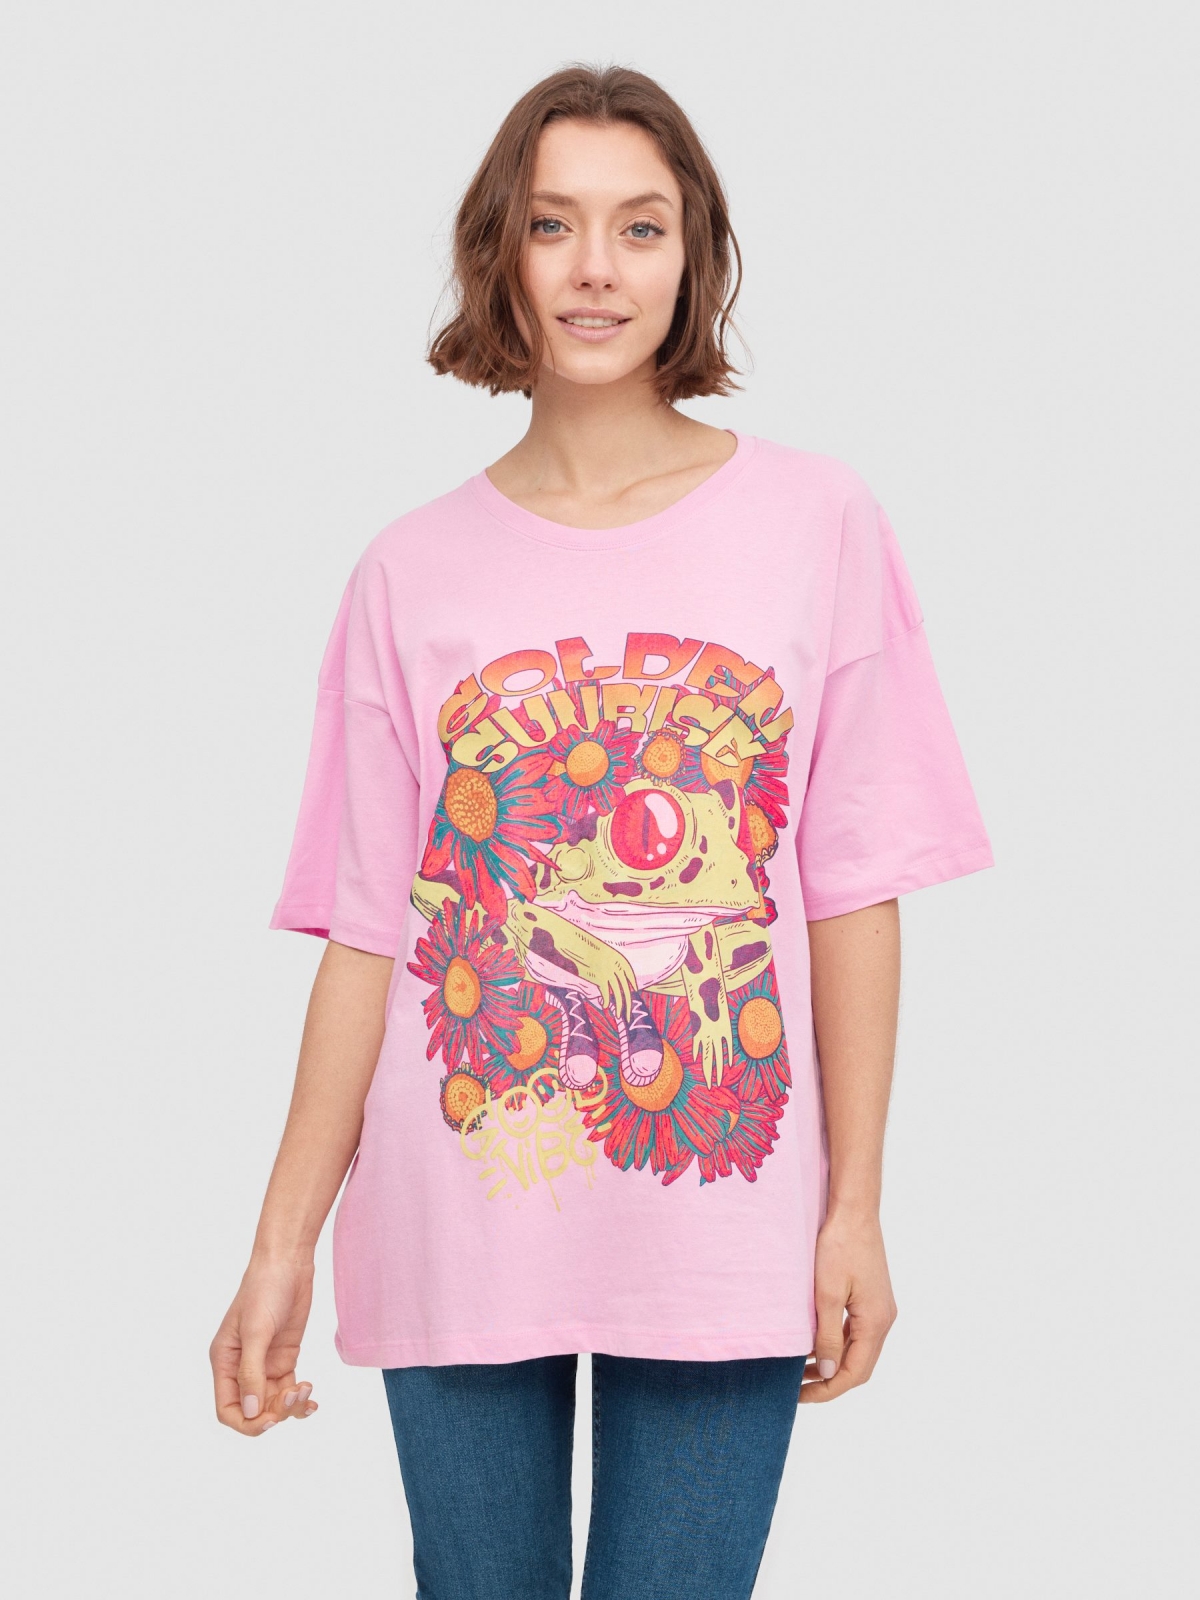 Sunrise oversize T-shirt magenta middle front view